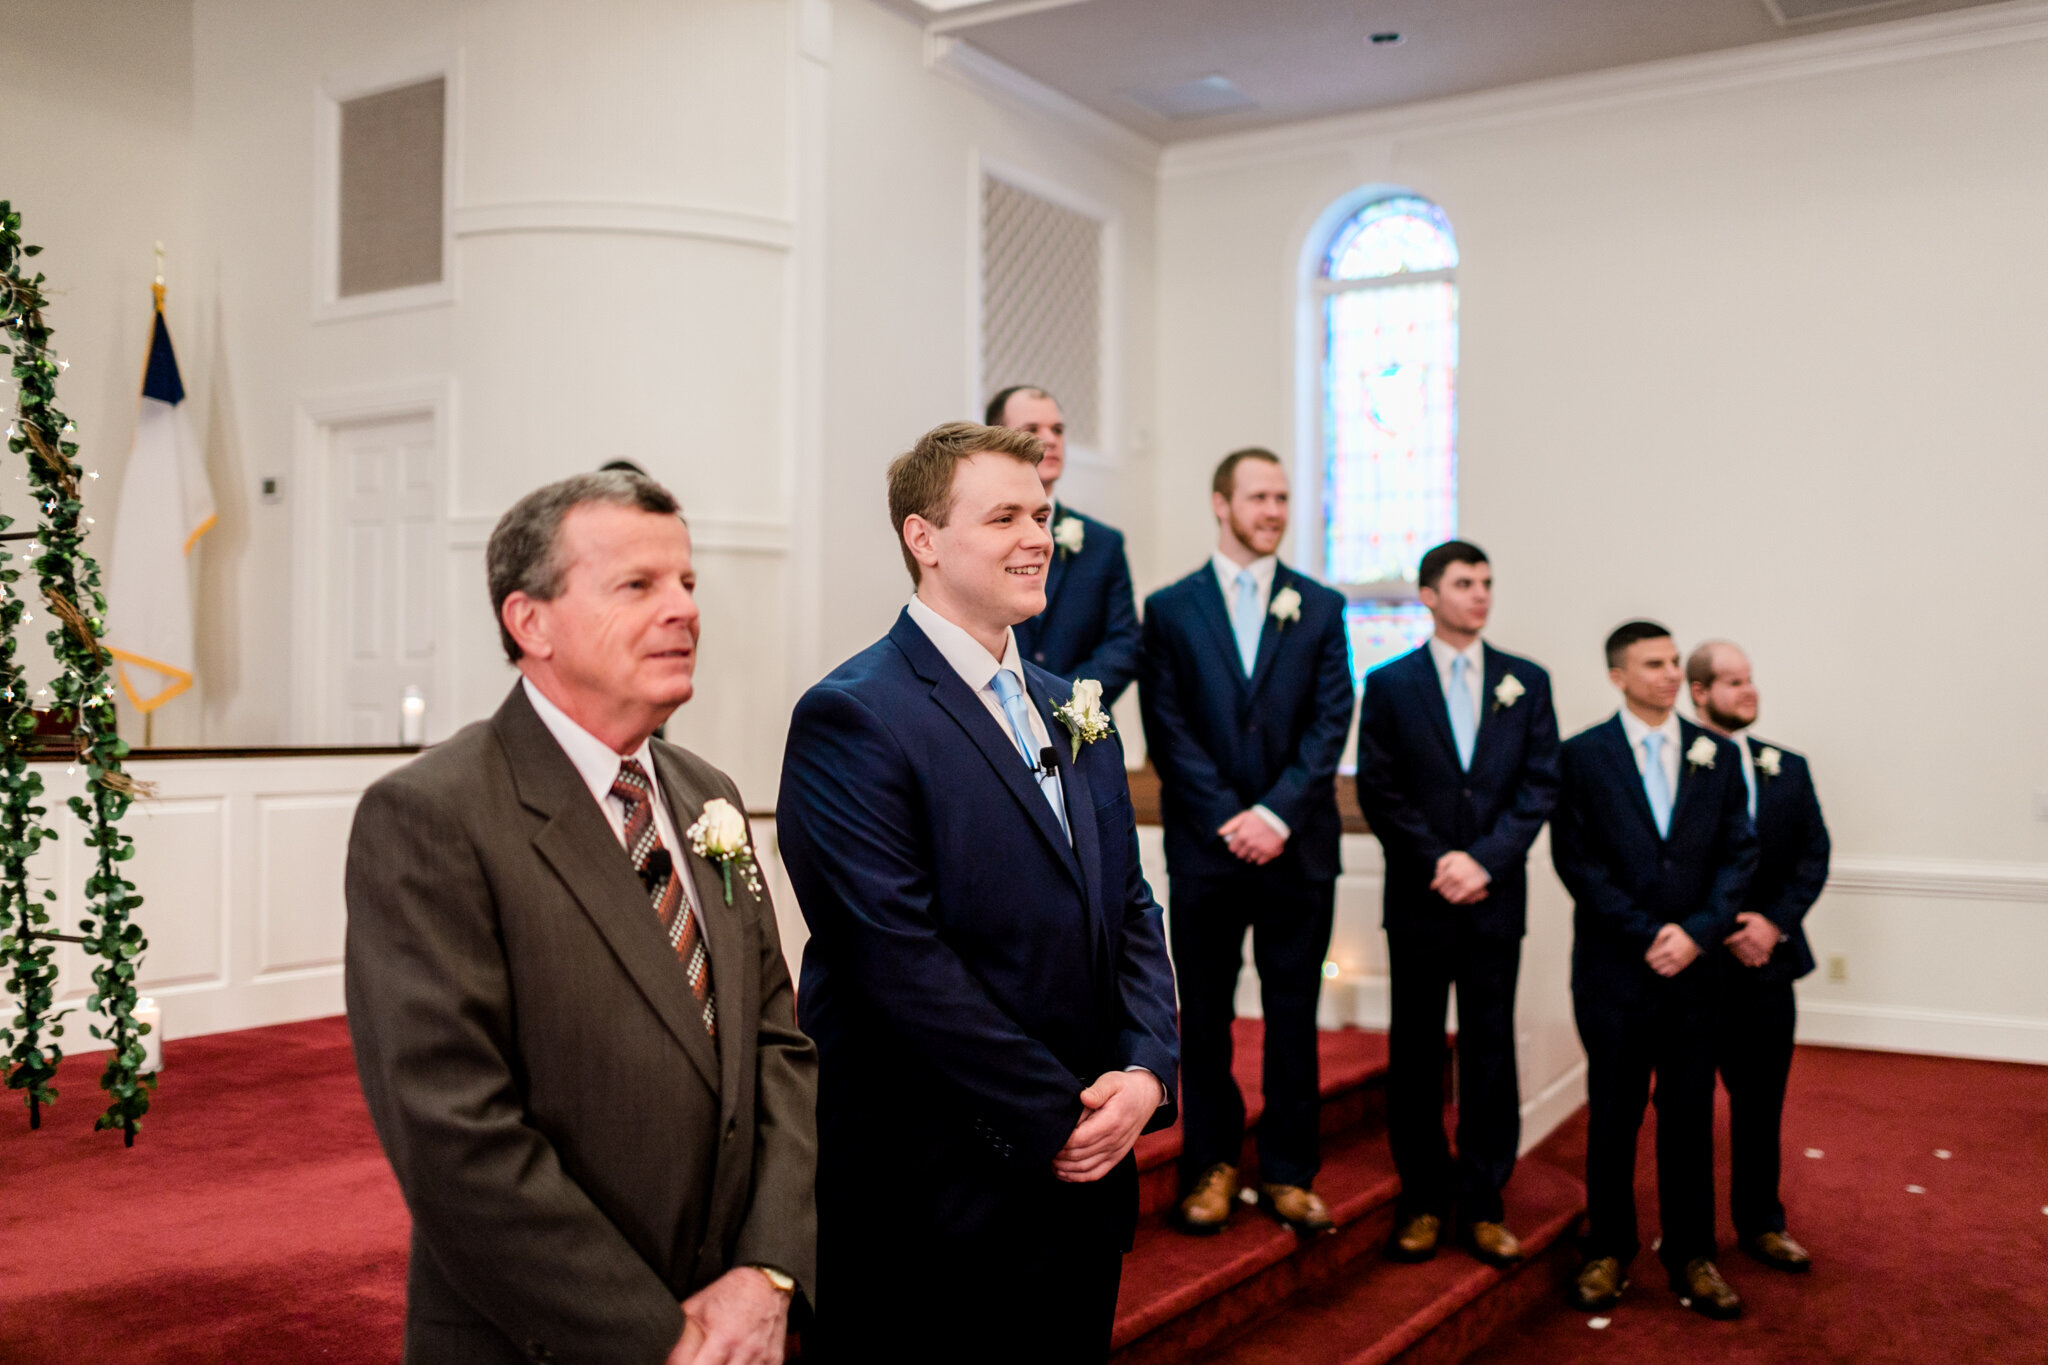 Durham Wedding Photographer | By G. Lin Photography | Groom waiting for bride at front of church